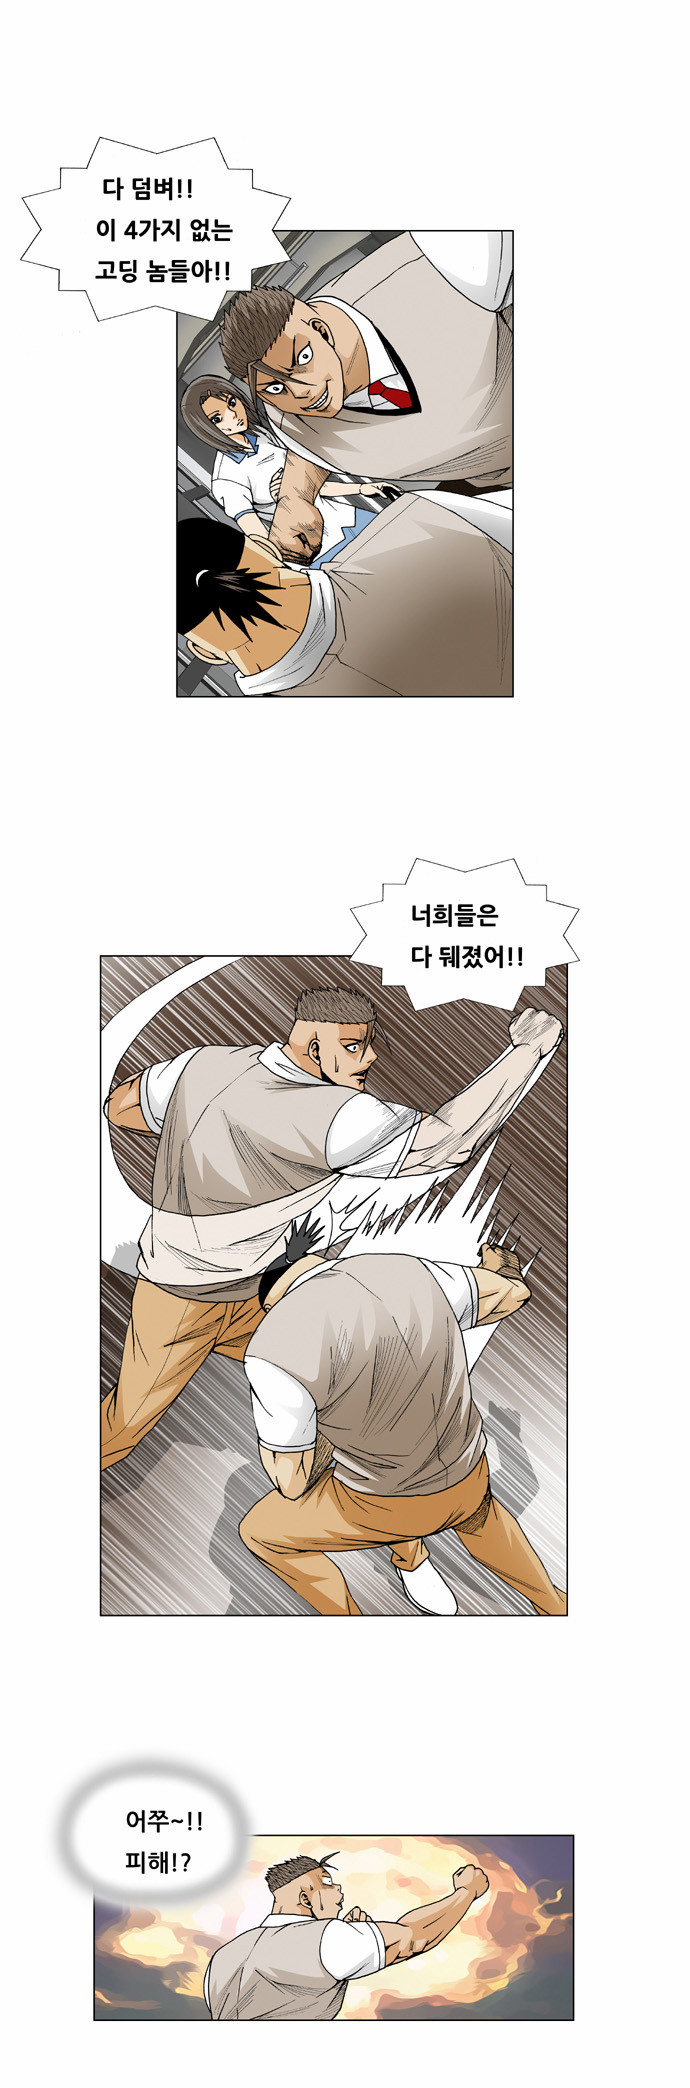 Ultimate Legend - Kang Hae Hyo - Chapter 55 - Page 4